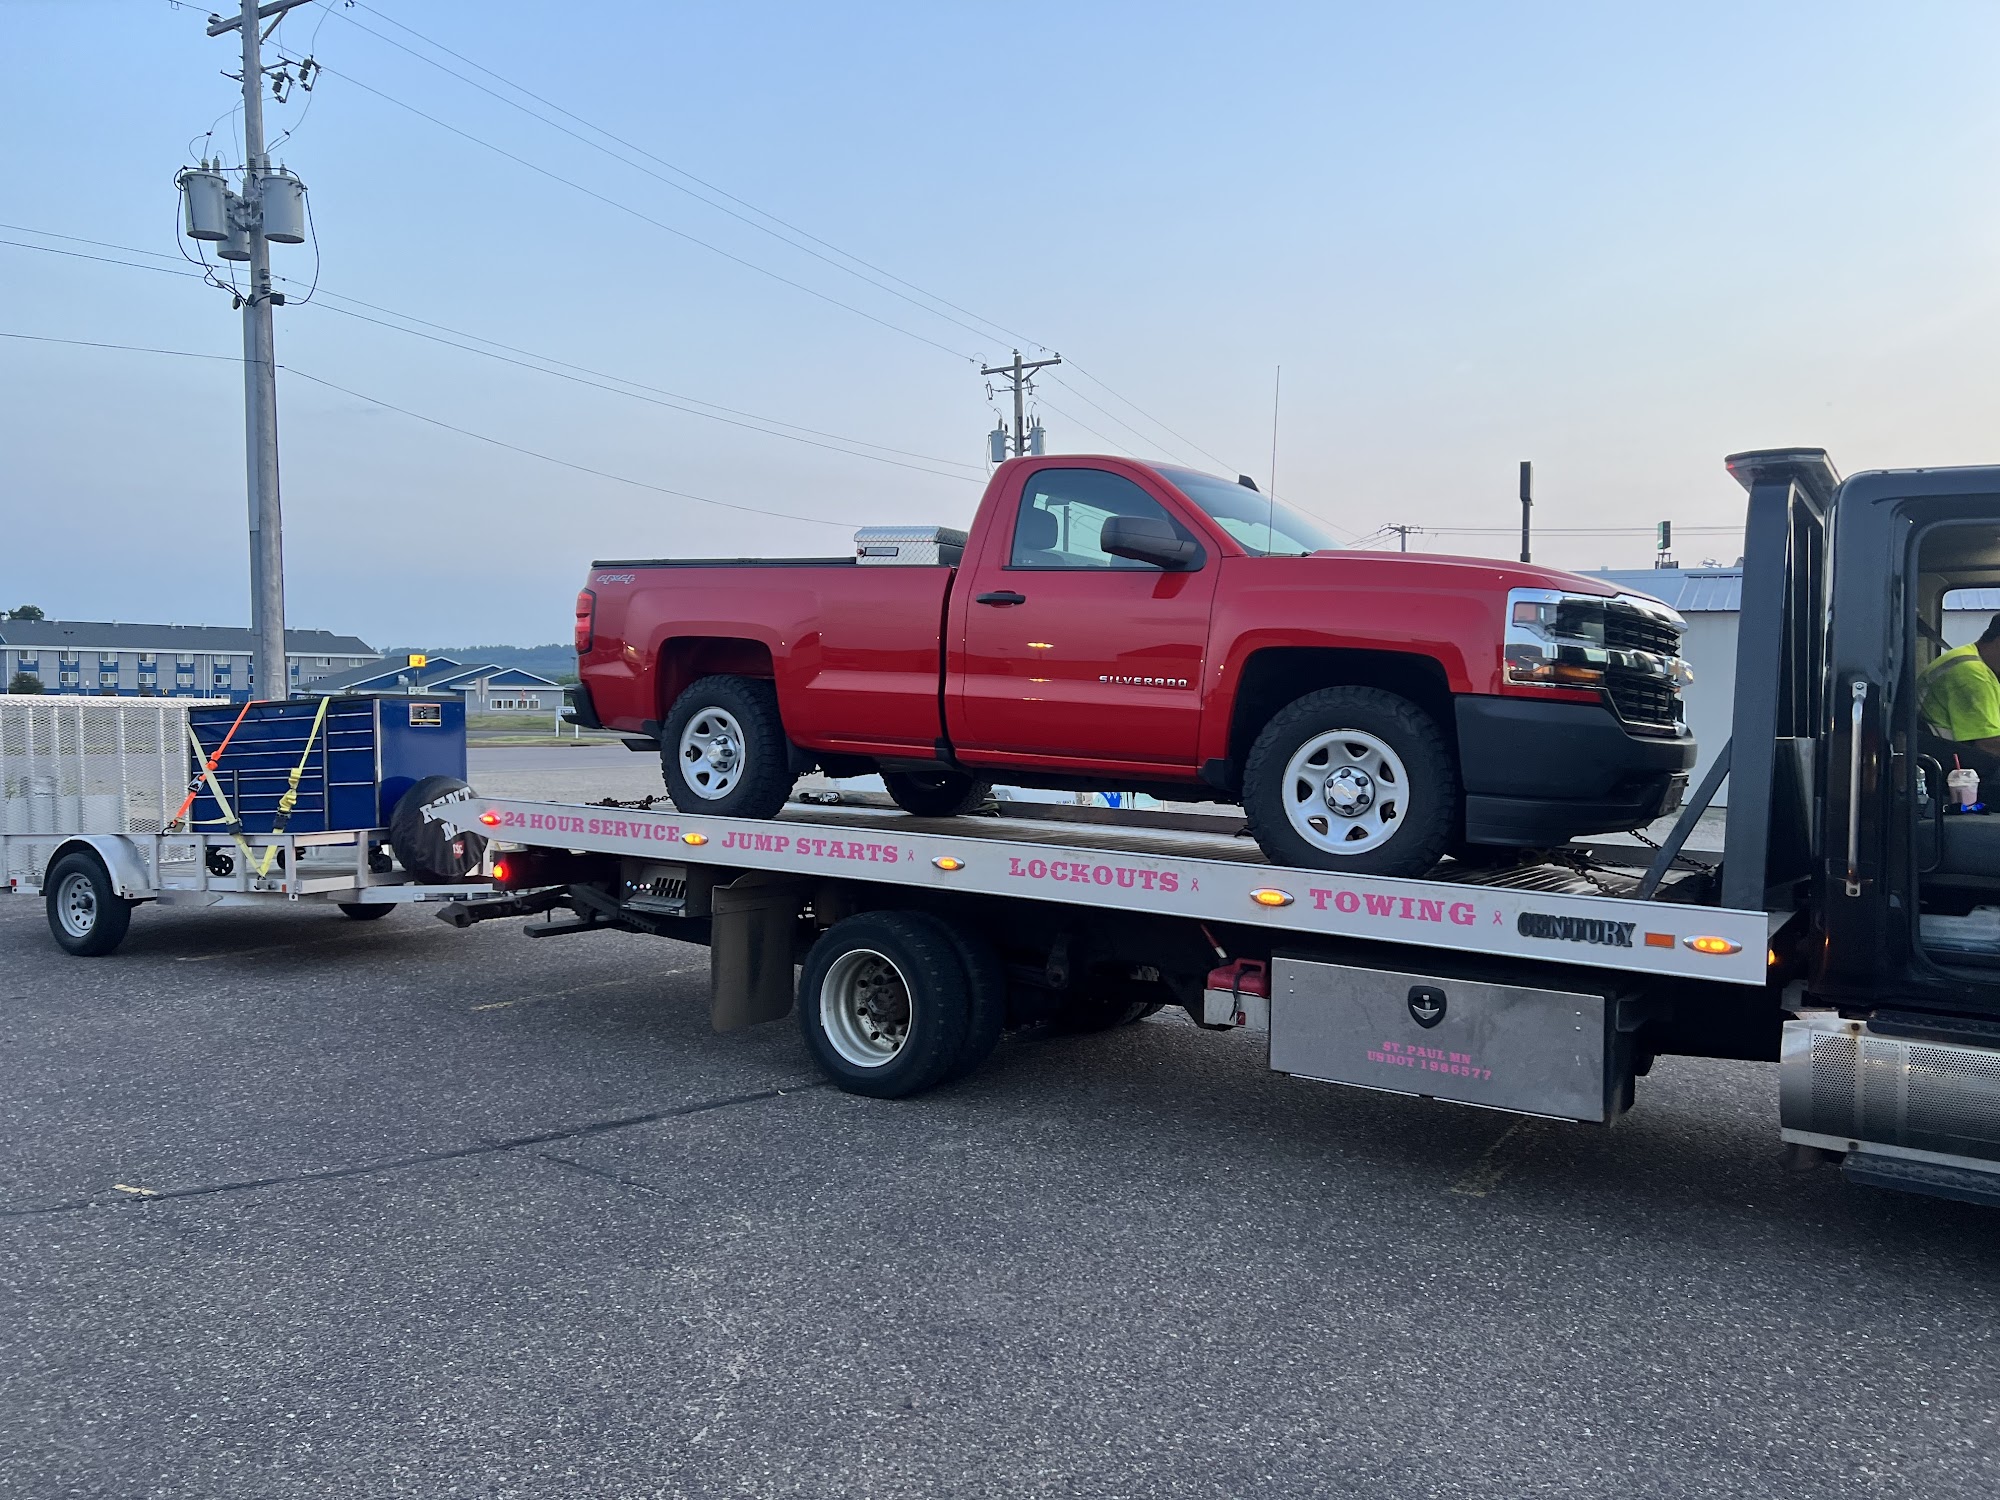 Luther Towing & Service 7093 21st Ave N, Centerville Minnesota 55038